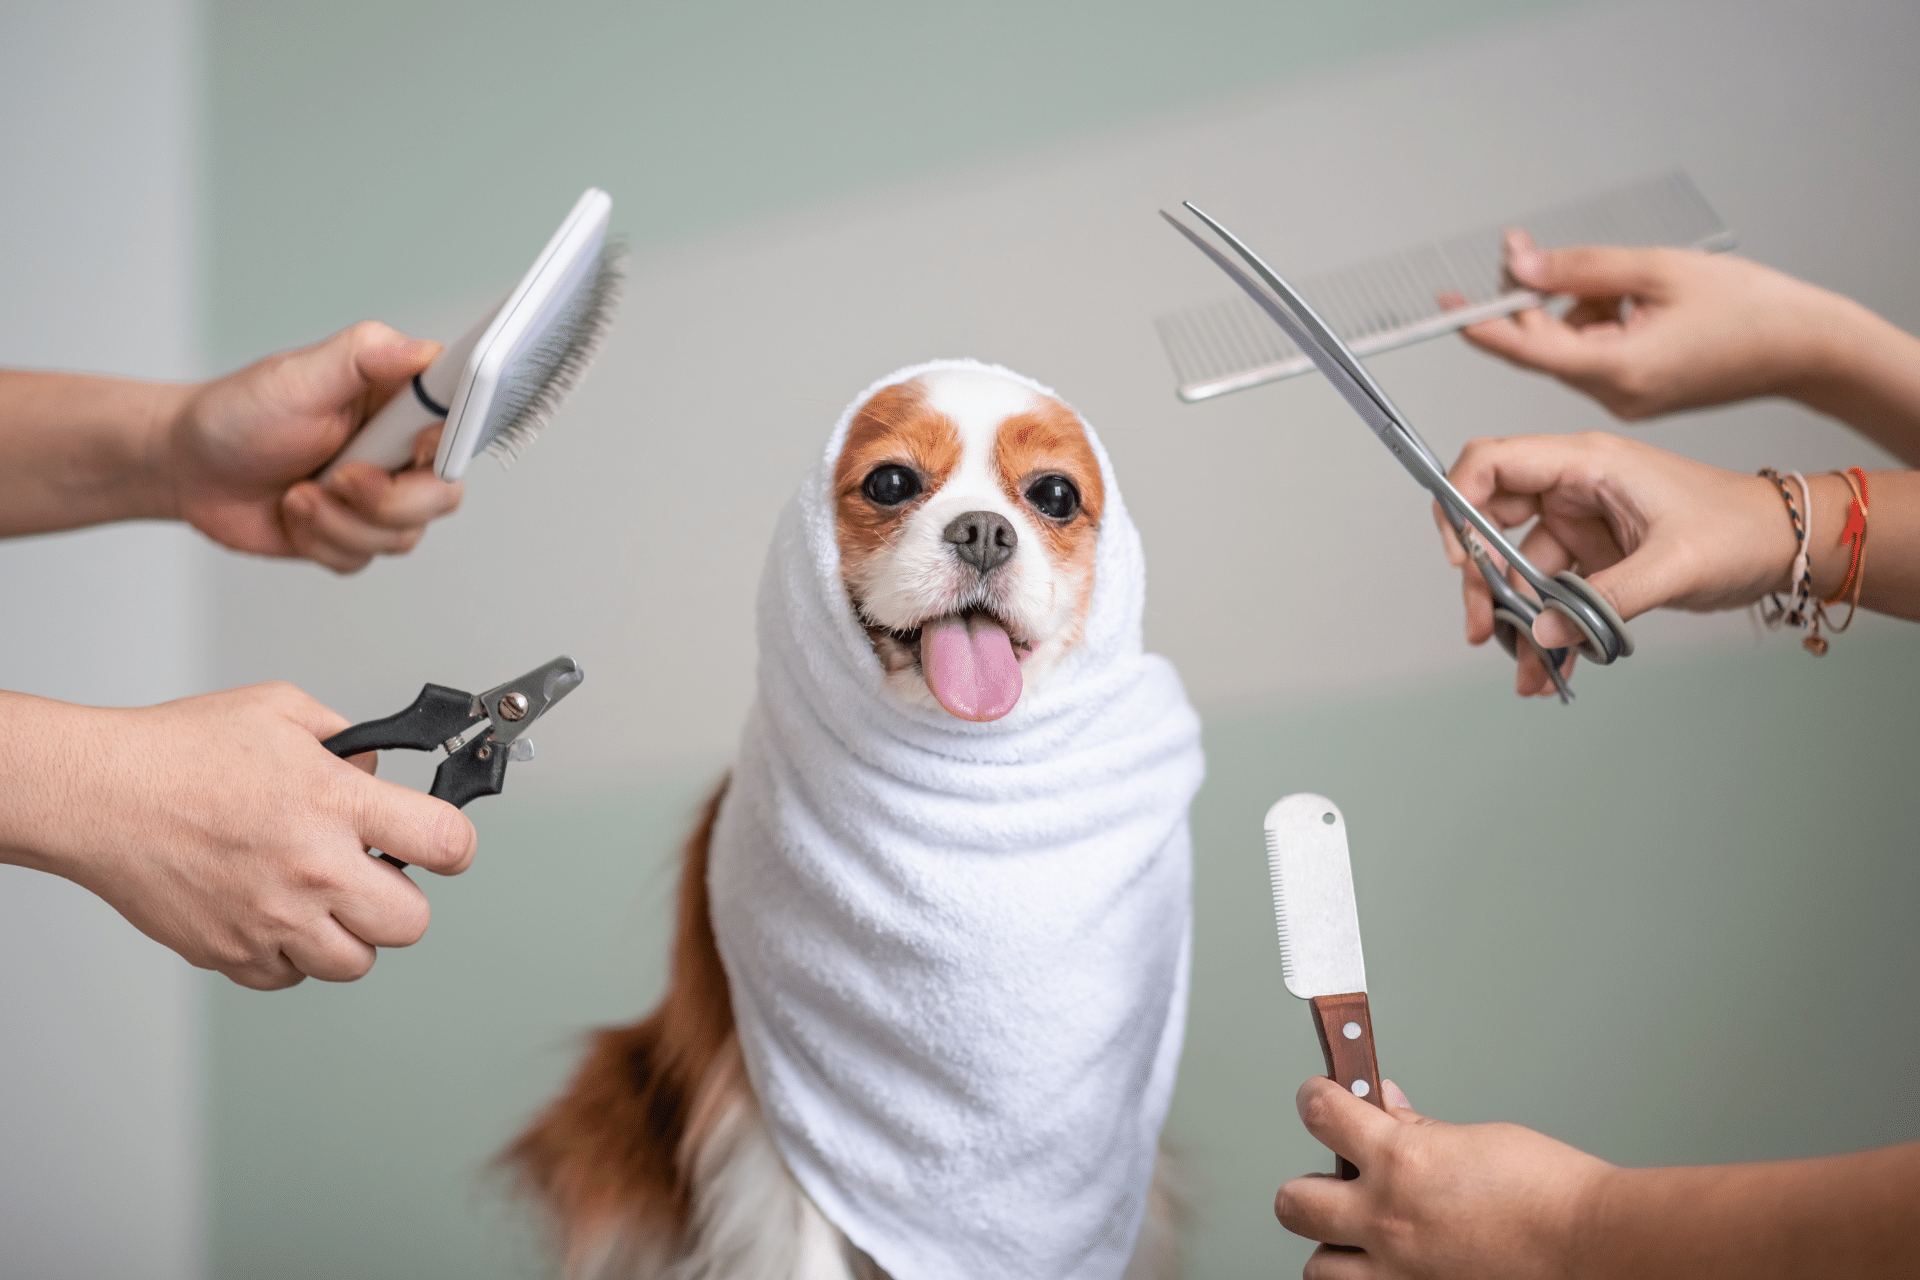 A small king charles cavalier wrapped in a towel in the centre of the image. Around it, hands hover holidng scissors, combs and clippers, preparing to groom.